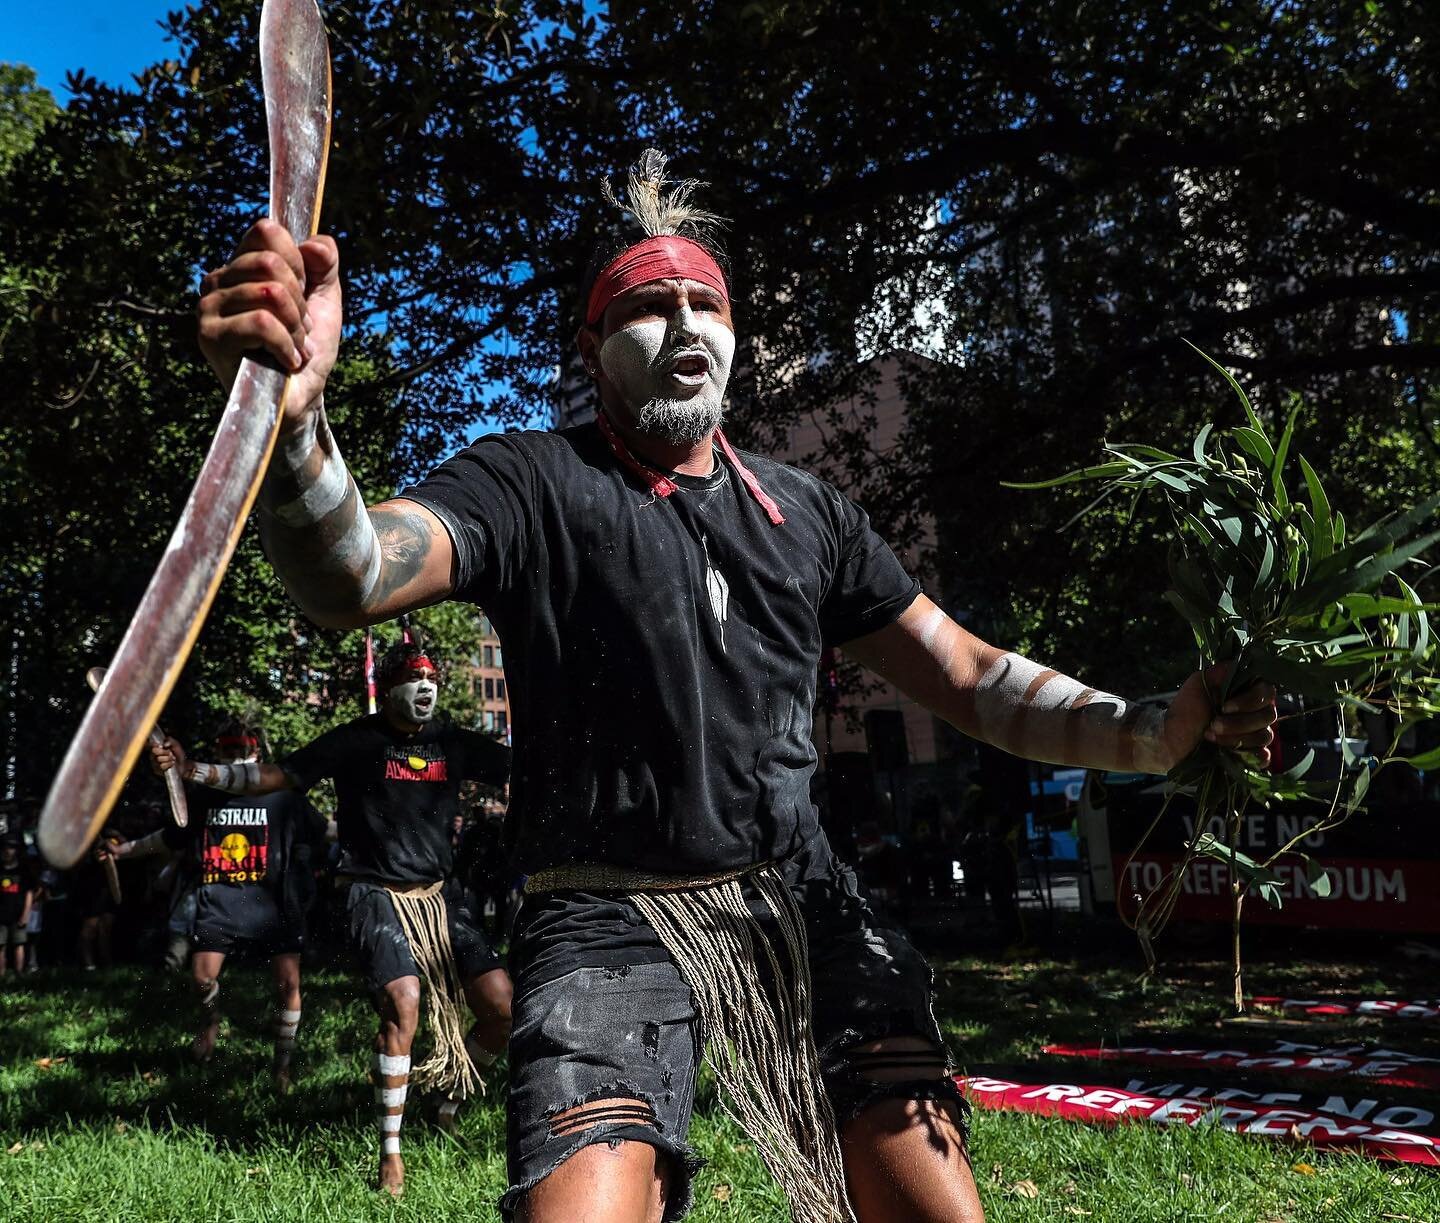 Hey mob 🙌🏽

Few deadly snaps of the brothers stomping up the invasion/ survival day protest on Gadigal country 👣🔥🖤

#muggera #muggeradancers #sydney #dance #ceremony #culture #koori #australia #murri #yugembeh #minjungbal #mununjali #gadigal #No